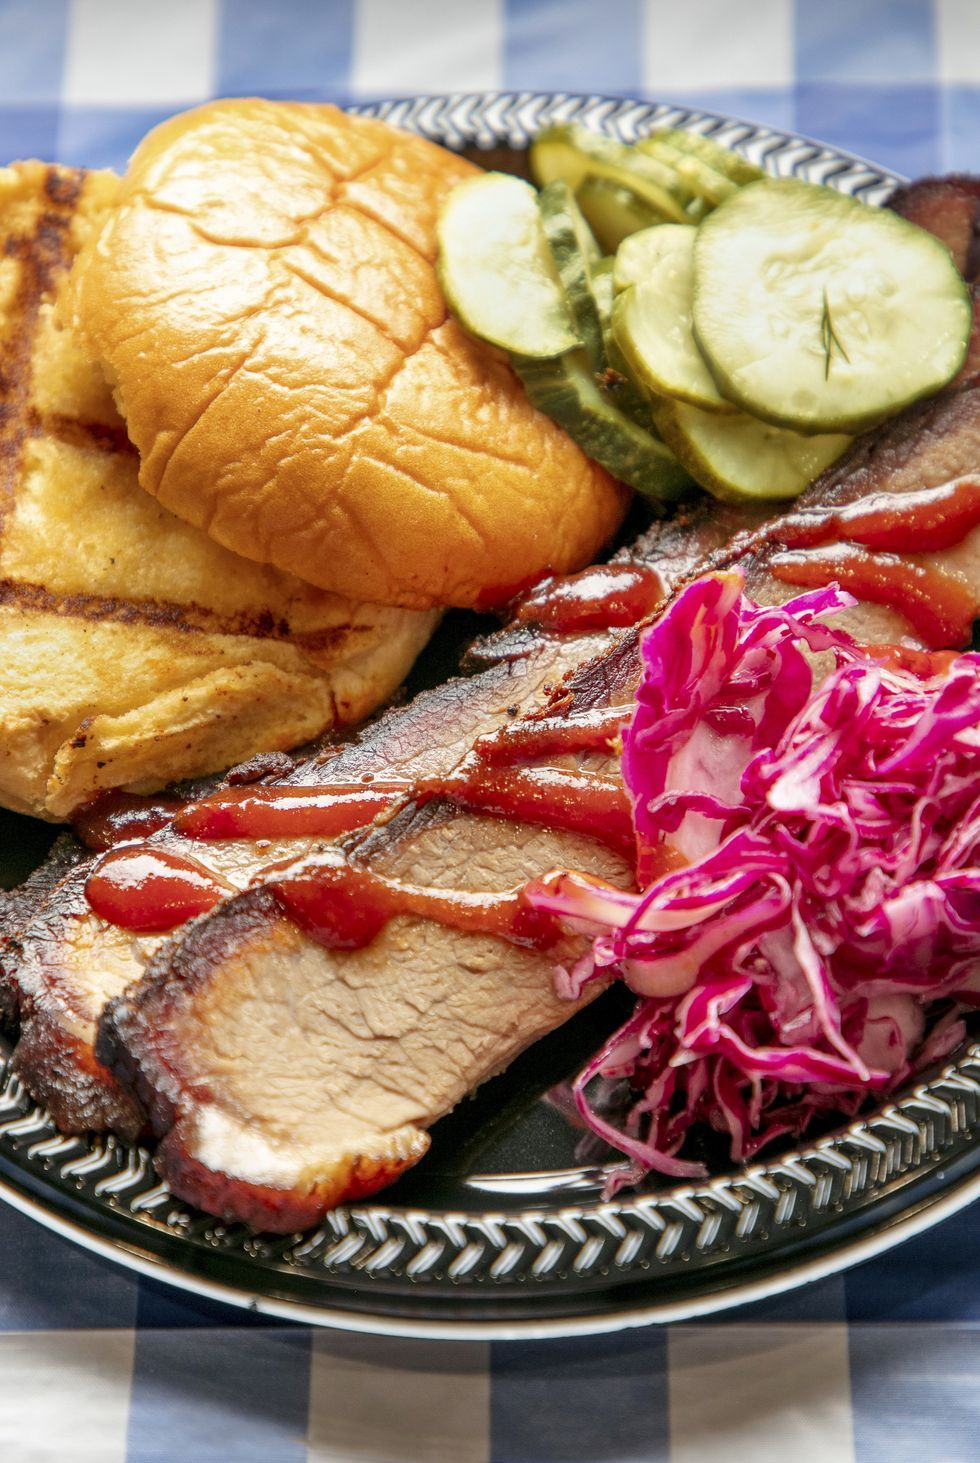 10 Must-Have Recipes for Your Next BBQ